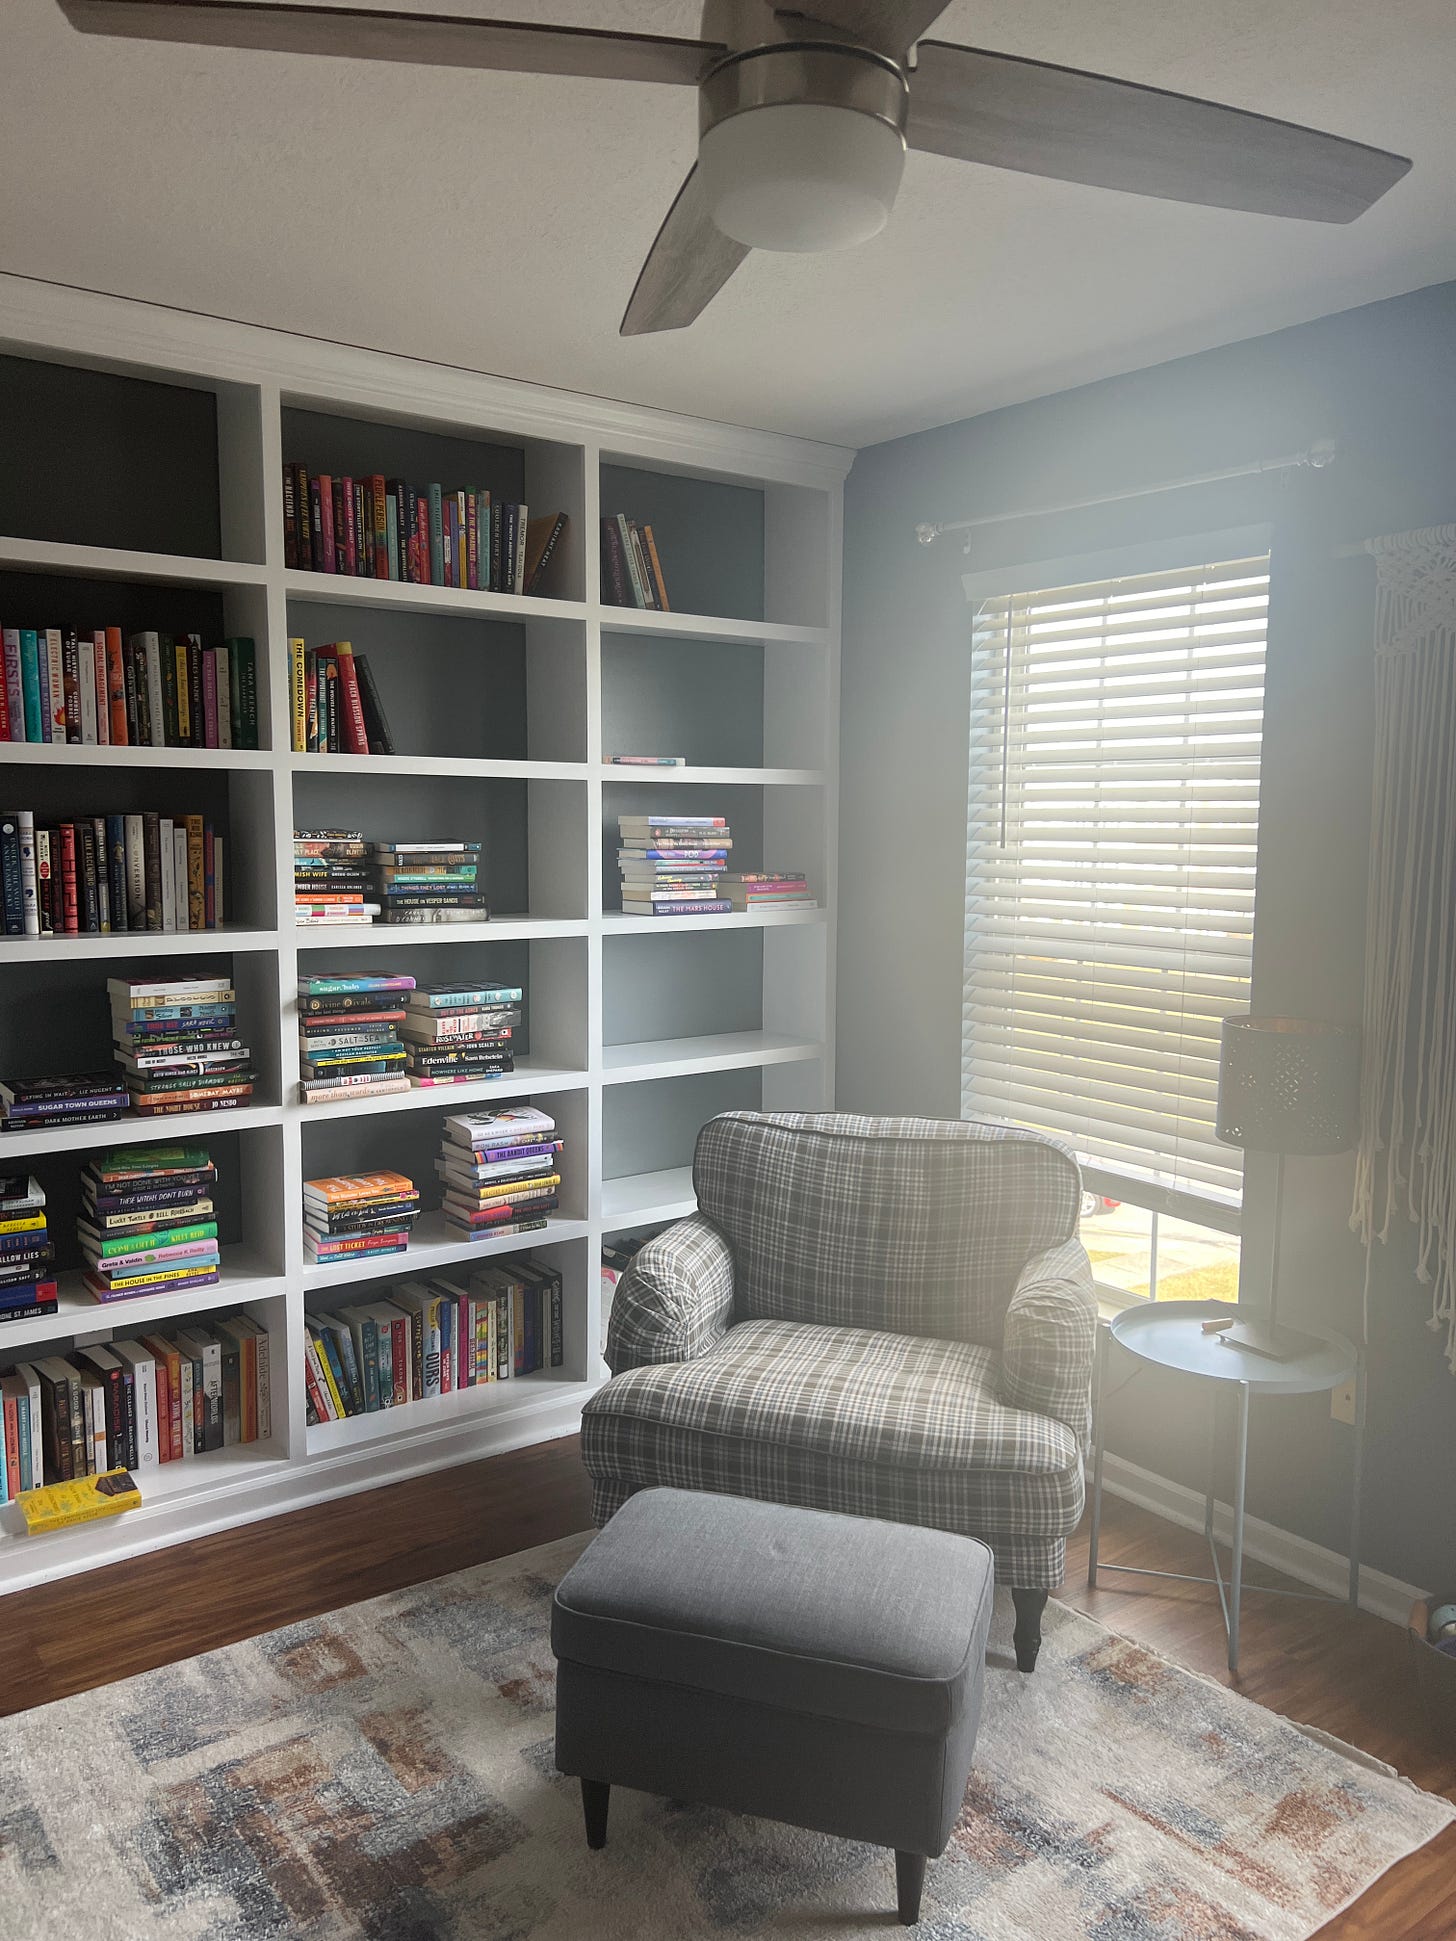 A plaid armchair in front of white built-in bookshelves with tons of books on them.